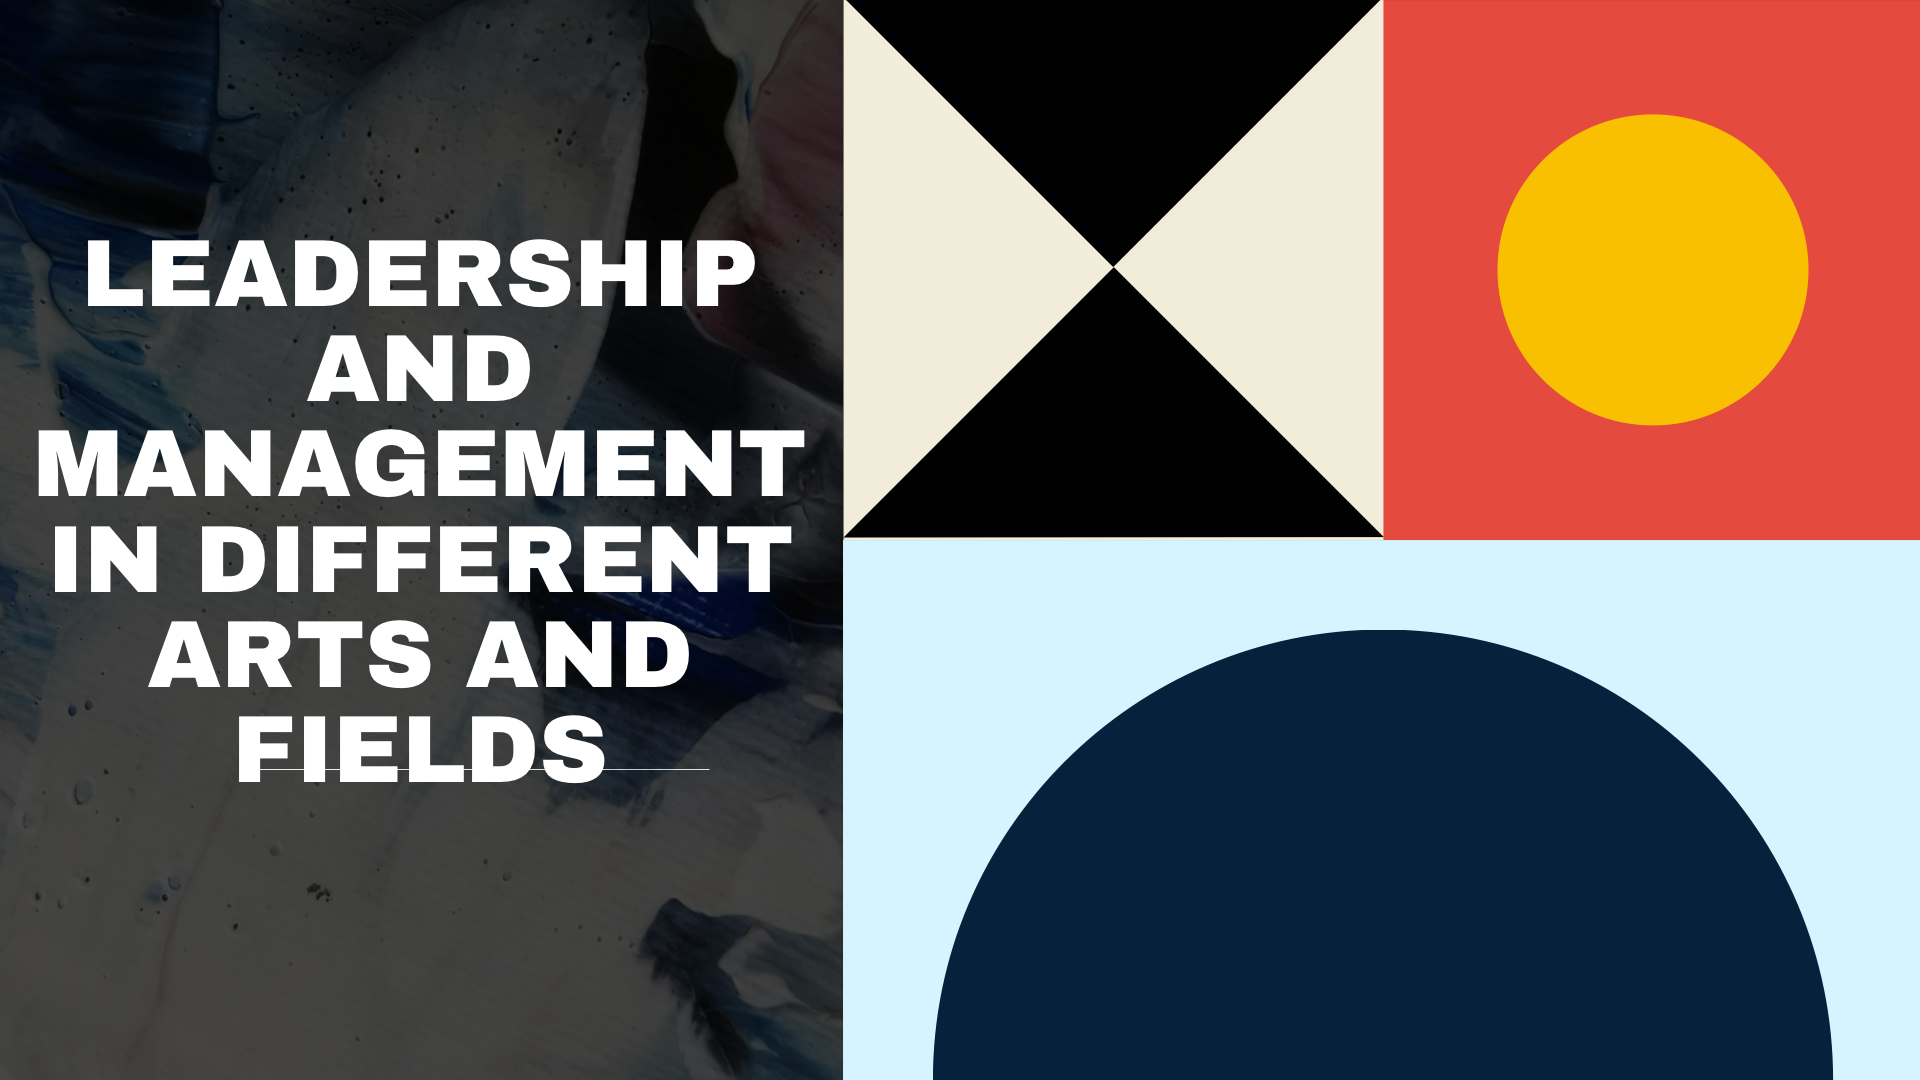 AAD_Leadership and Management in Different Arts and Fields